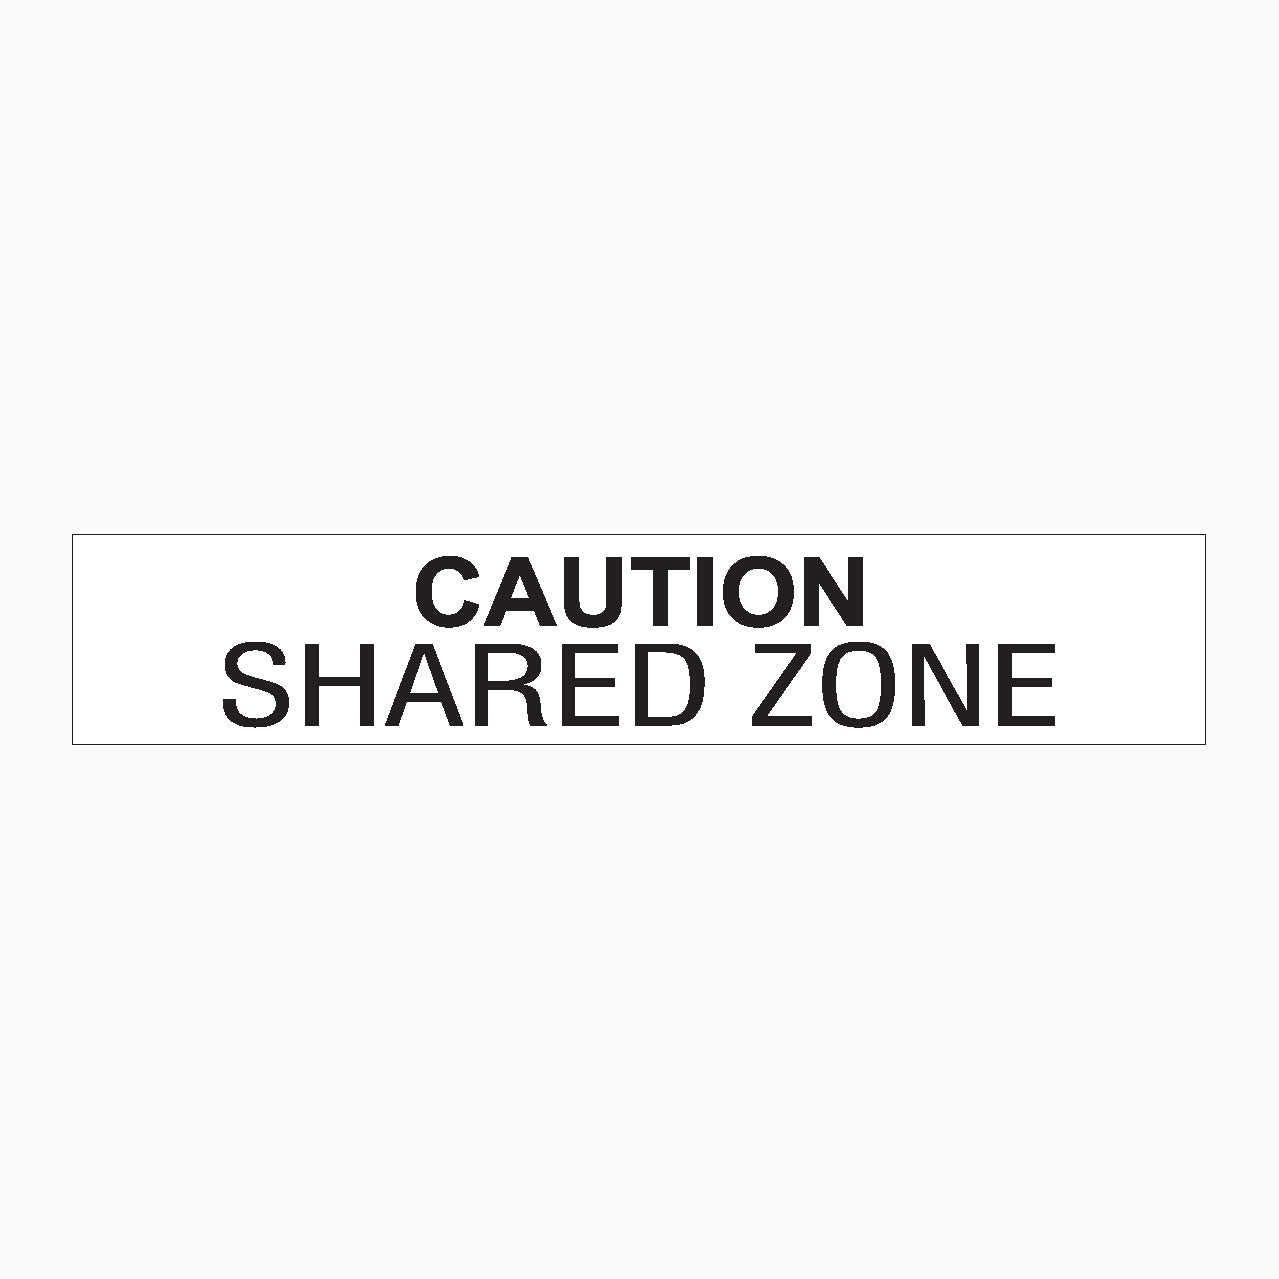 CAUTION - SHARED ZONE SIGN